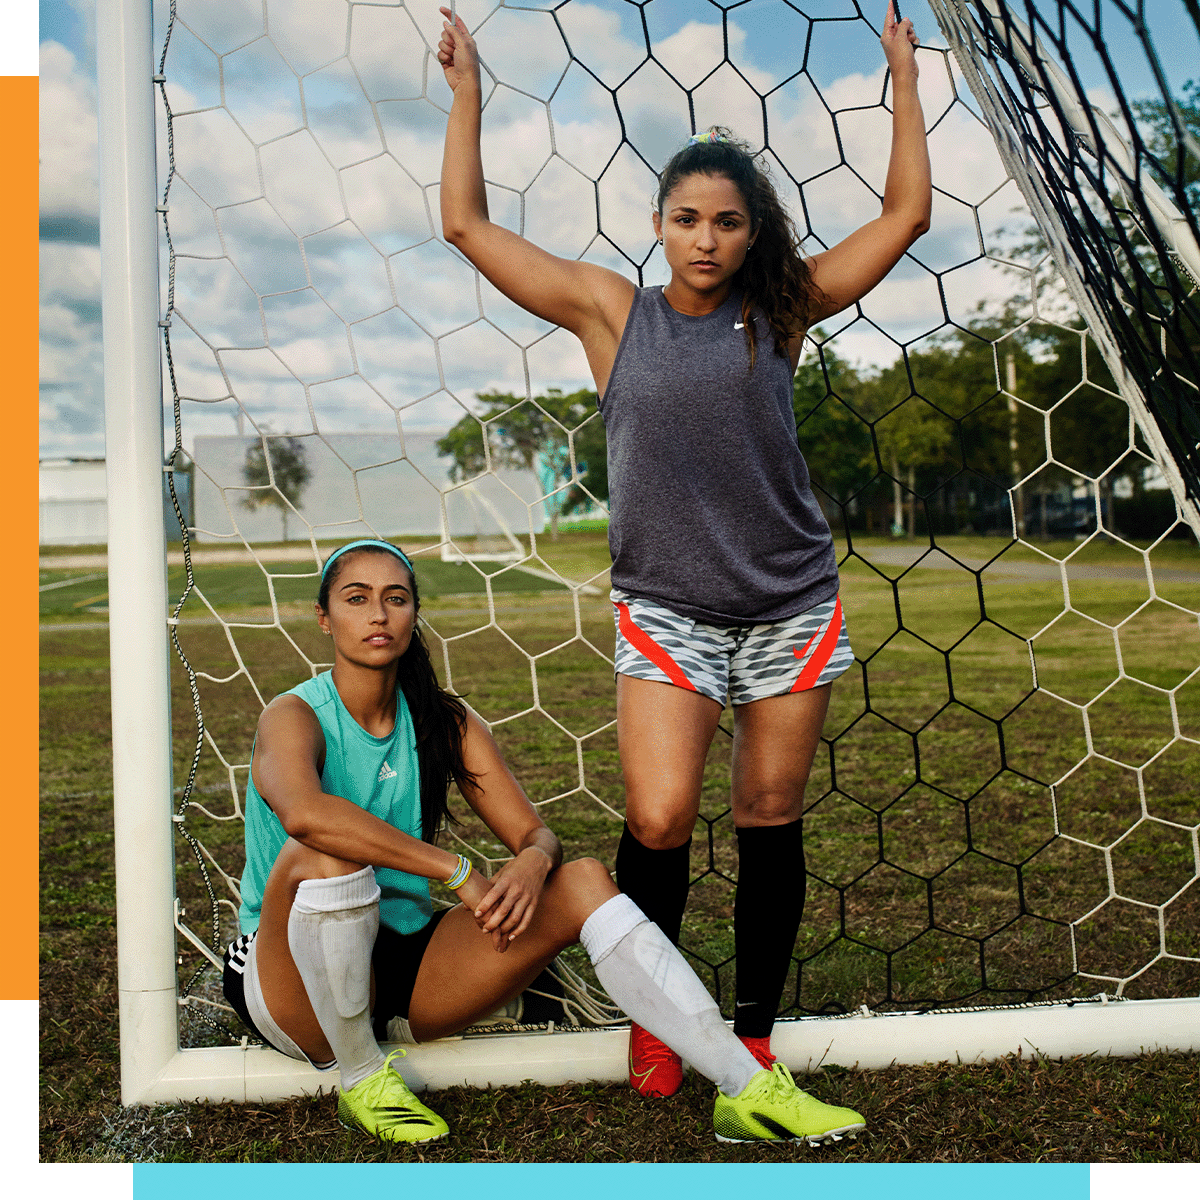 Dick's Sporting Goods: Today is National Girls & Women in Sports